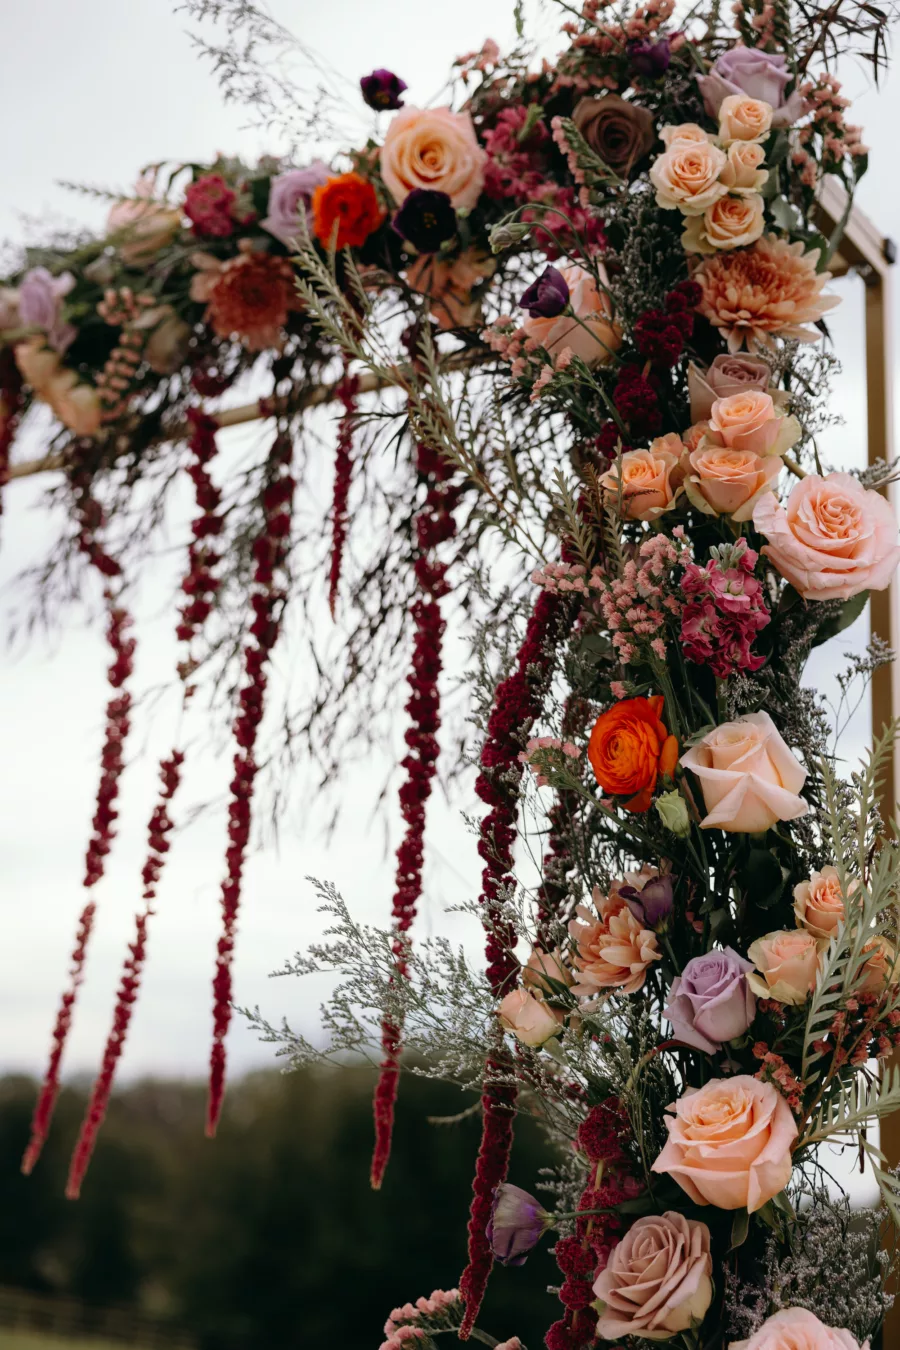 Whimsical Purple and Peach Roses, Chrysanthemums, Amaranthus, and Greenery Wedding Ceremony Arbor Decor Inspiration | Tampa Florist Save The Date Florida